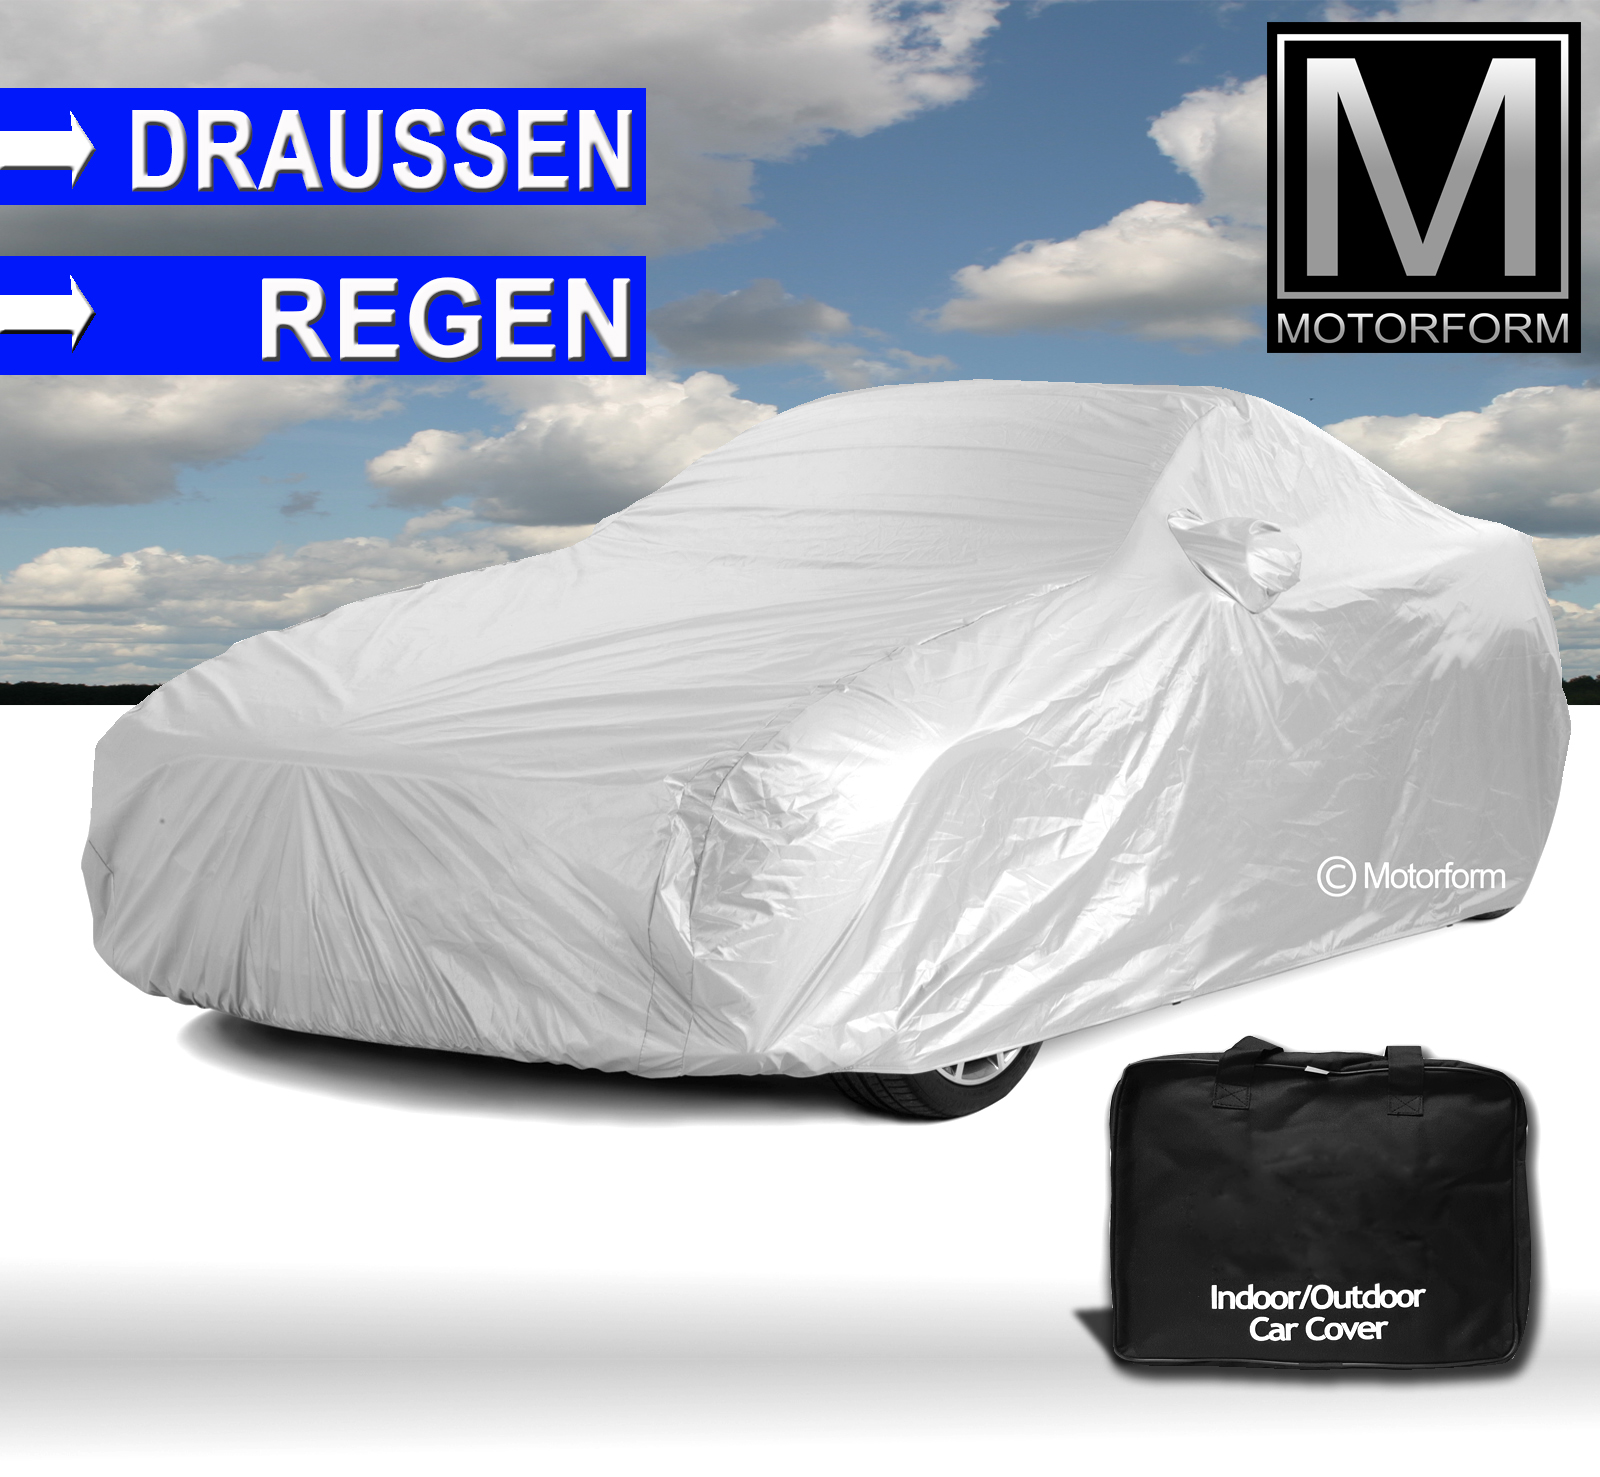 Voyager Outdoor Car Cover for Mercedes SL-Class R129 (1989-2001)